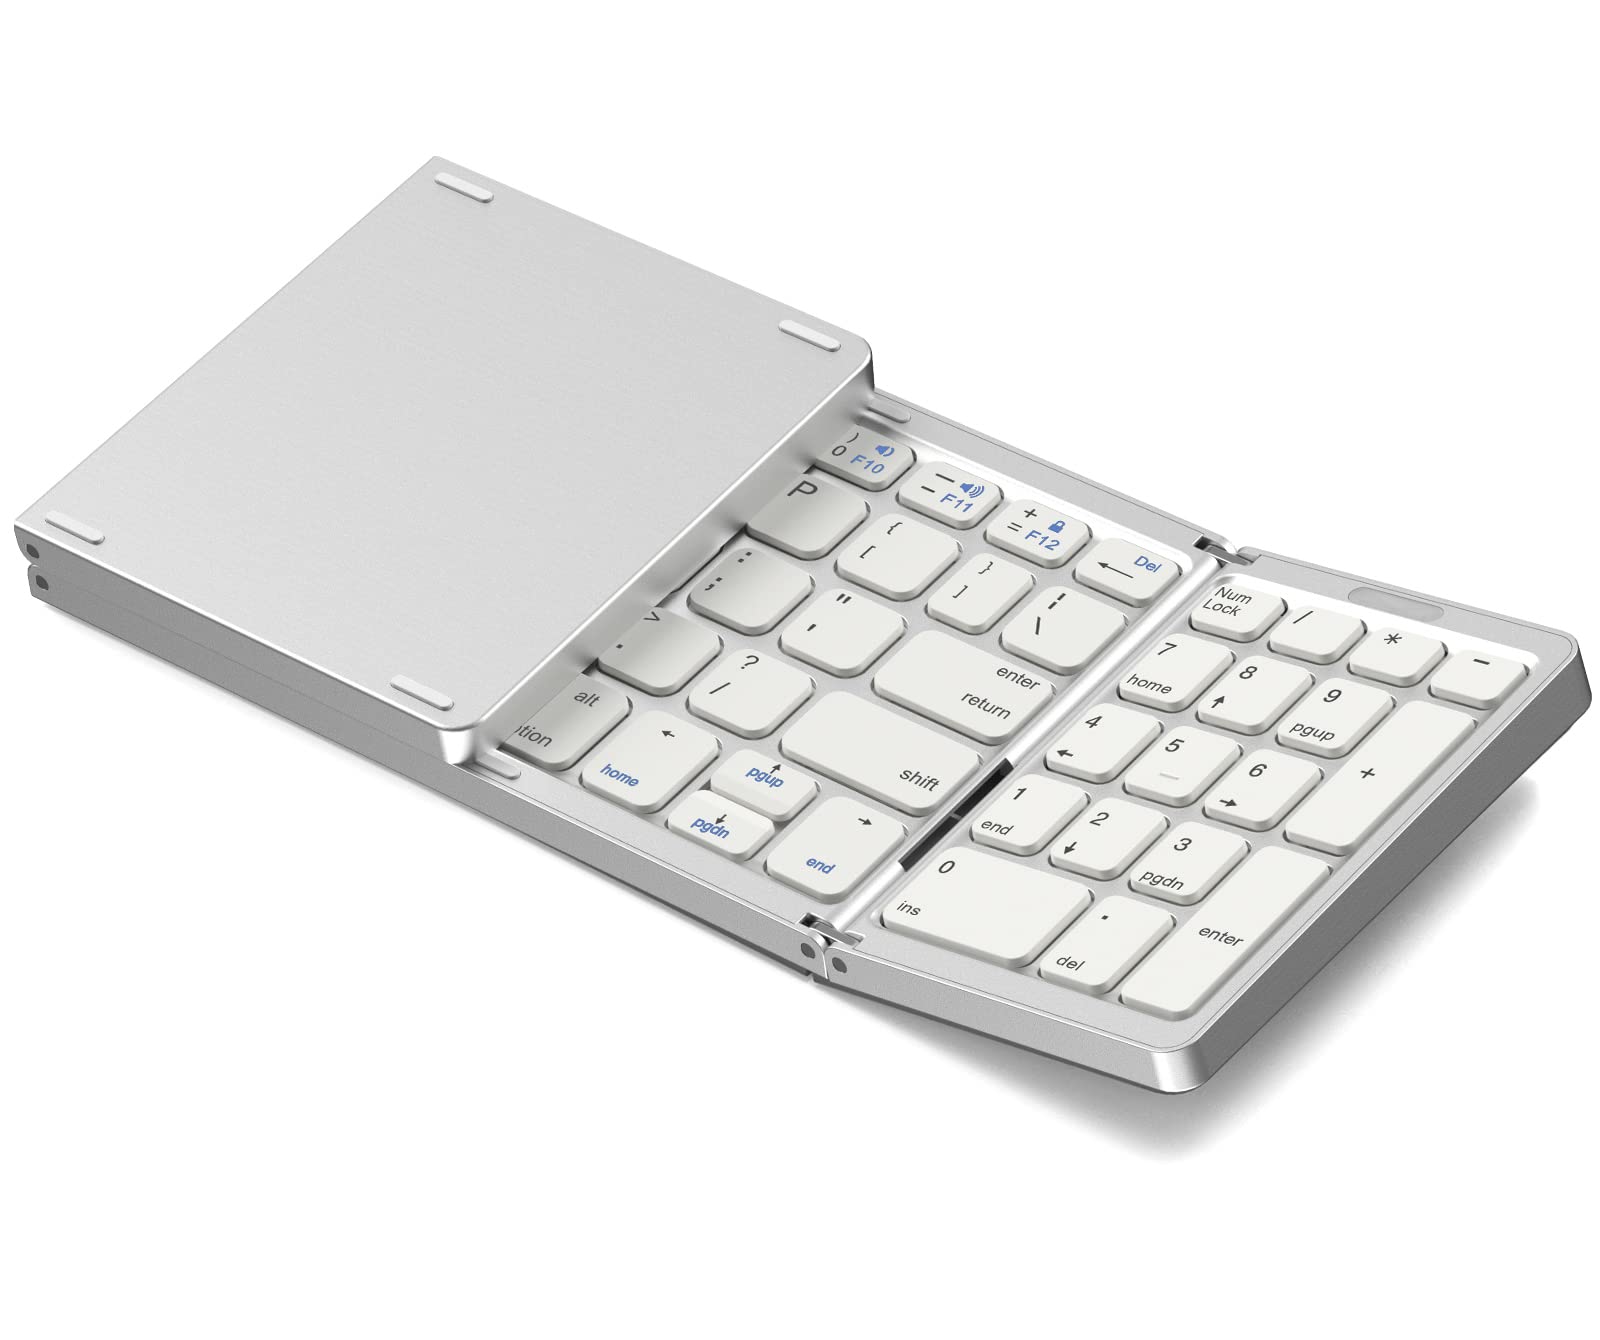 Keyboard with external devices unplugged